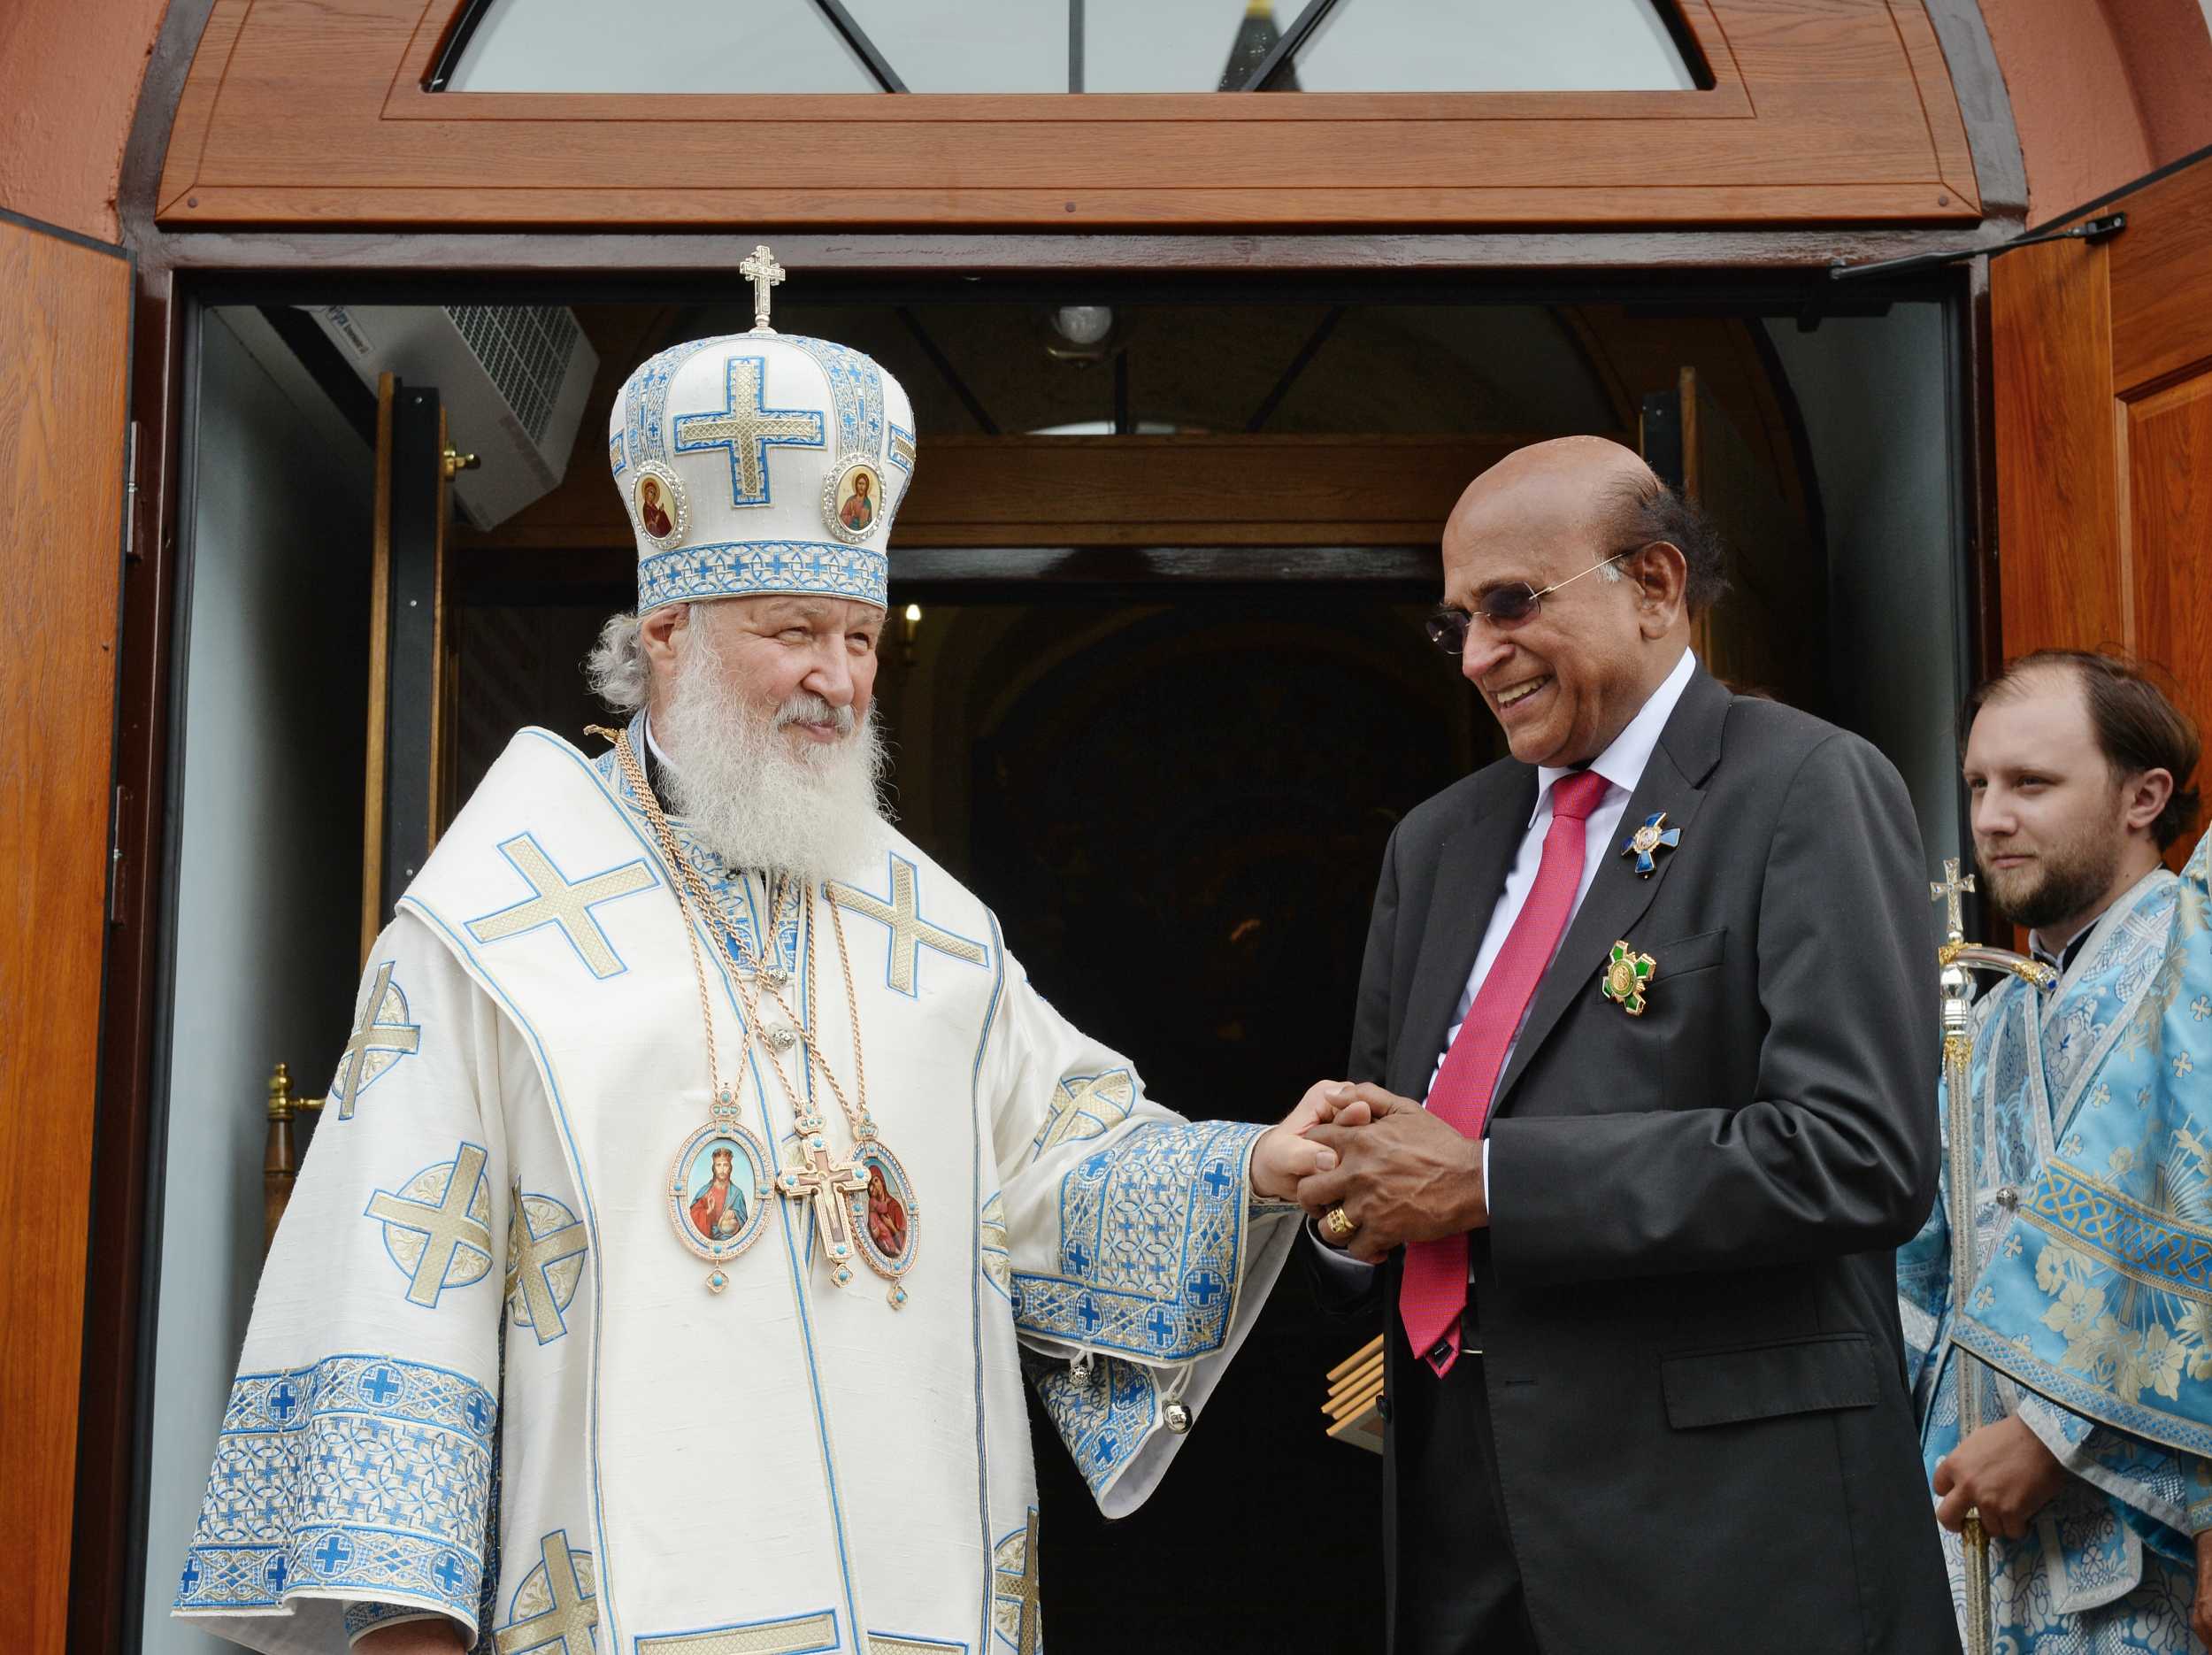 Indian Orthodox faithful Dr. Cherian Eapen Honored by the Russian Orthodox Church